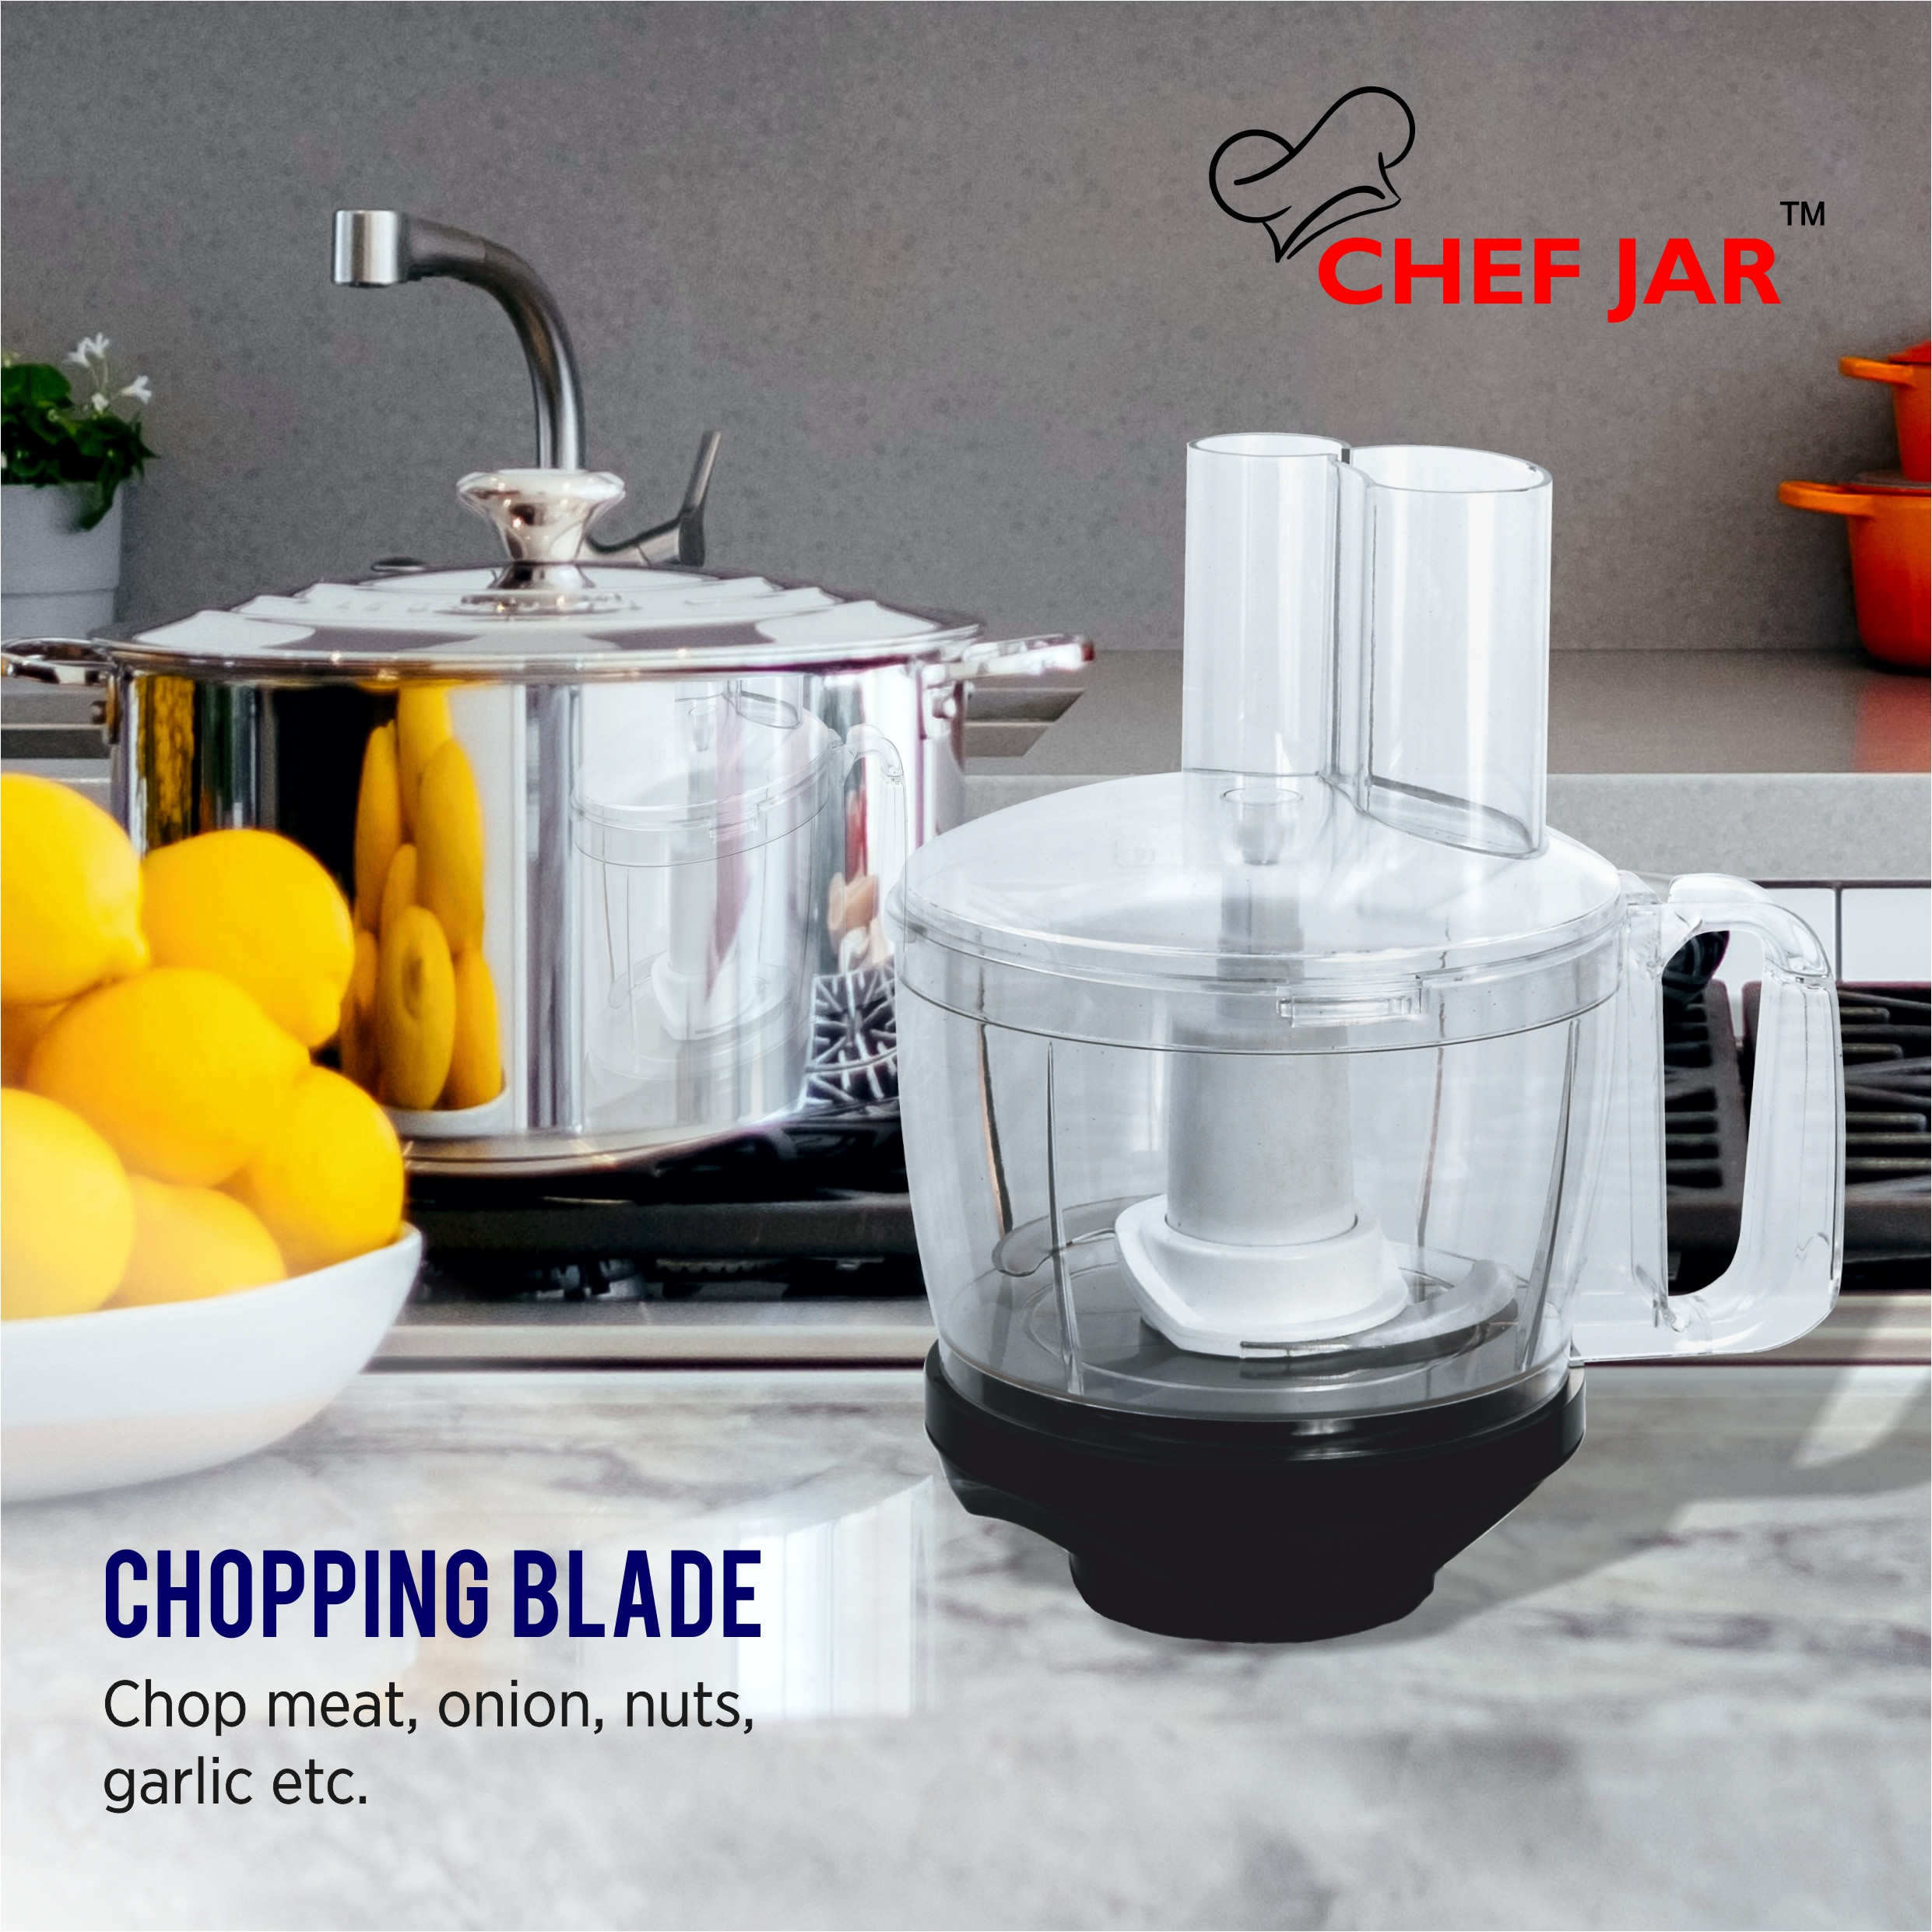 bajaj-classic-pro-600w-indian-mixer-grinder-with-special-chef-jar-stainless-steel-jars-indian-mixer-grinder-spice-coffee-grinder-110v-for-use-in-canada-usa11